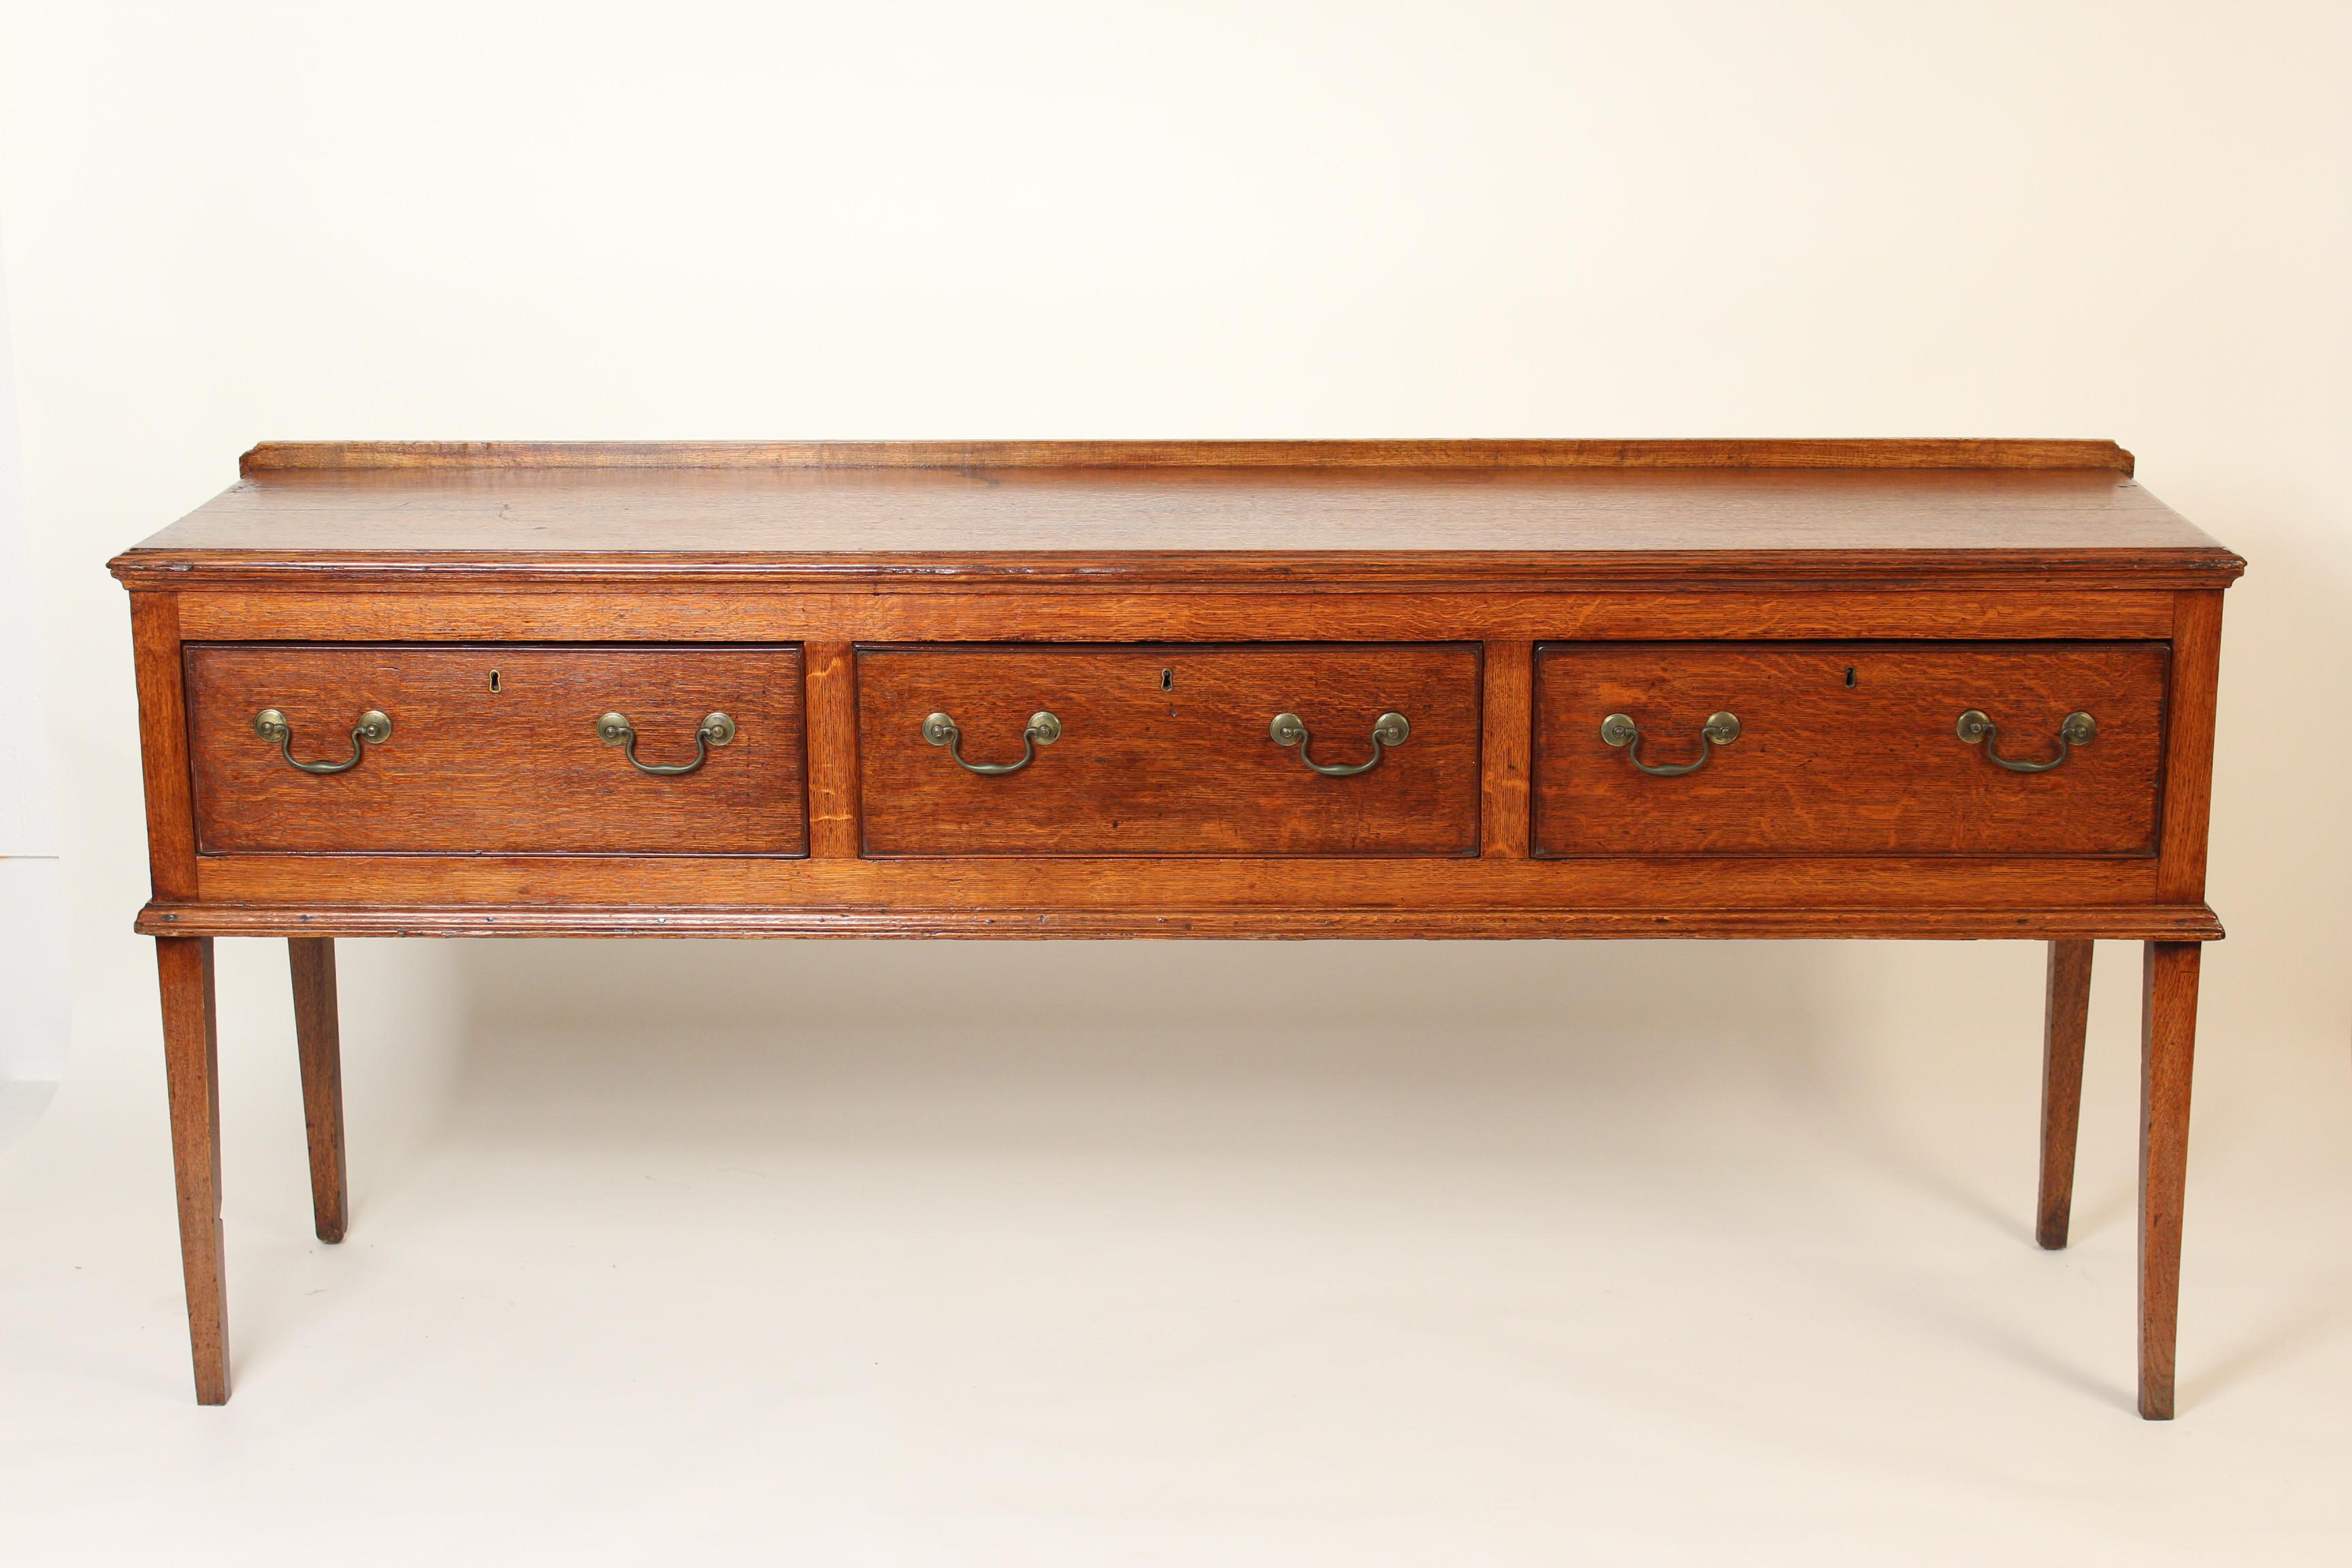 Antique George III style oak sideboard, late 19th-early 20th century.